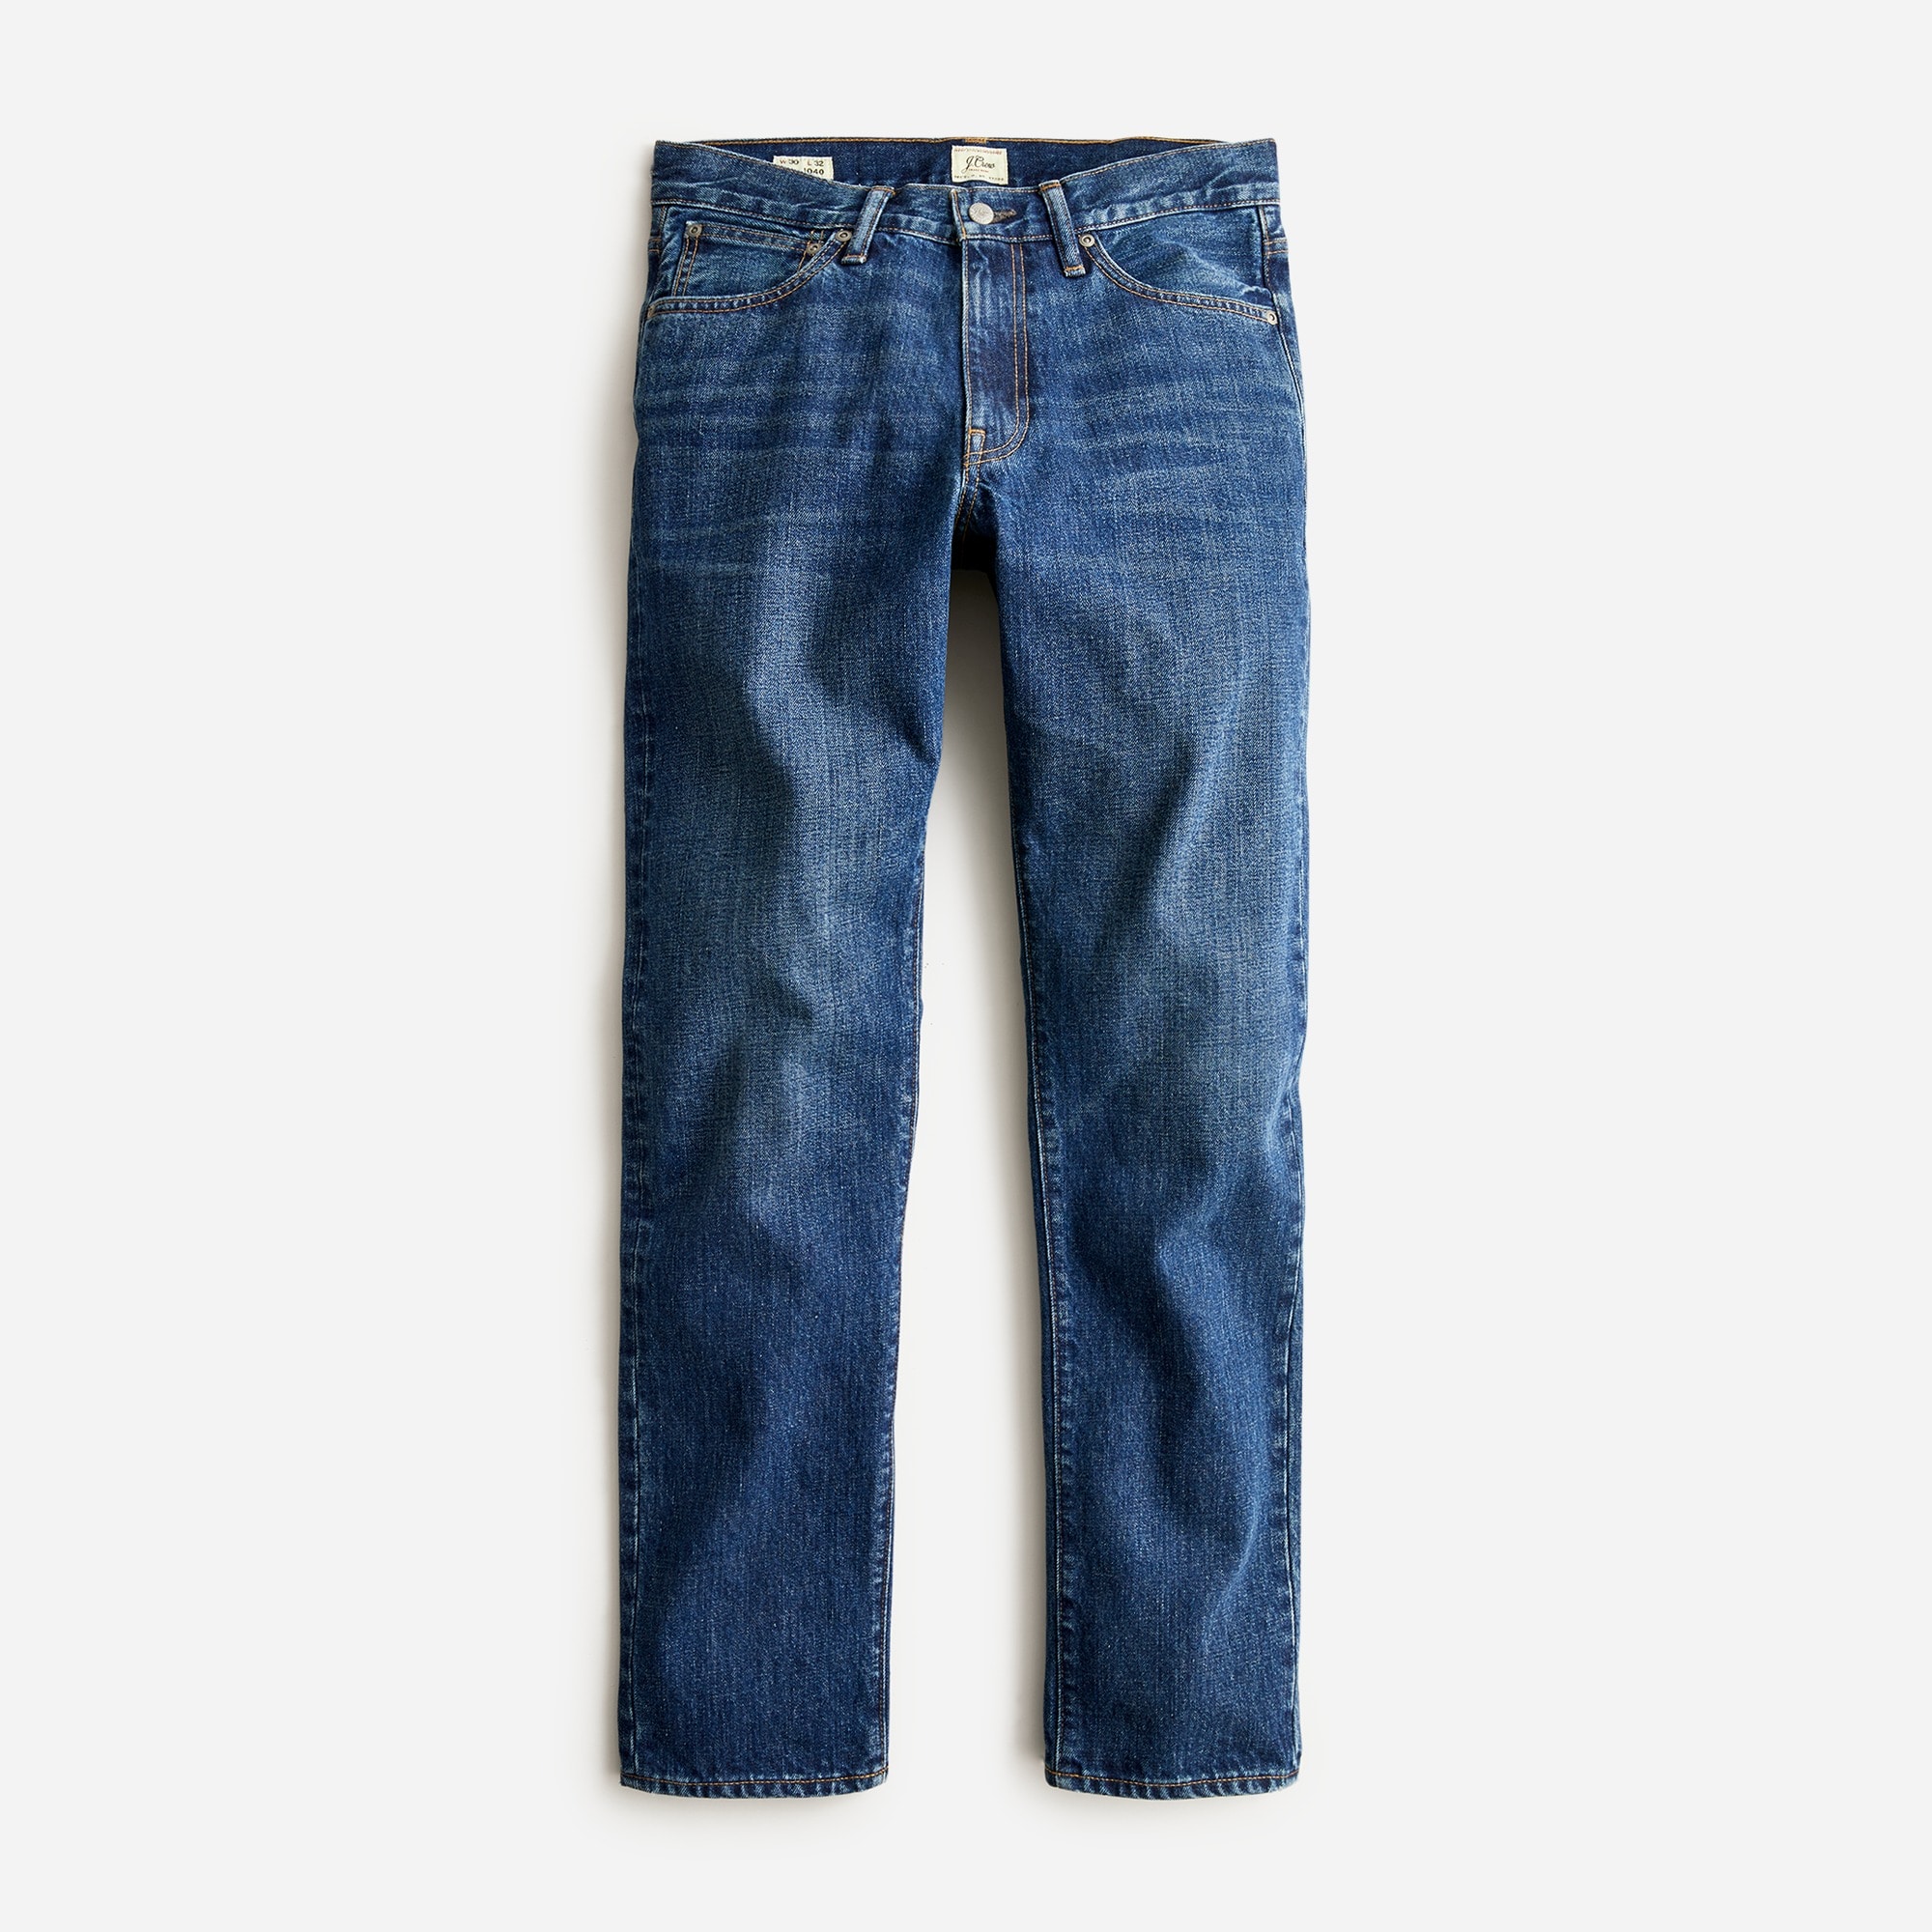 mens 1040 Athletic Tapered-fit jean in one-year wash